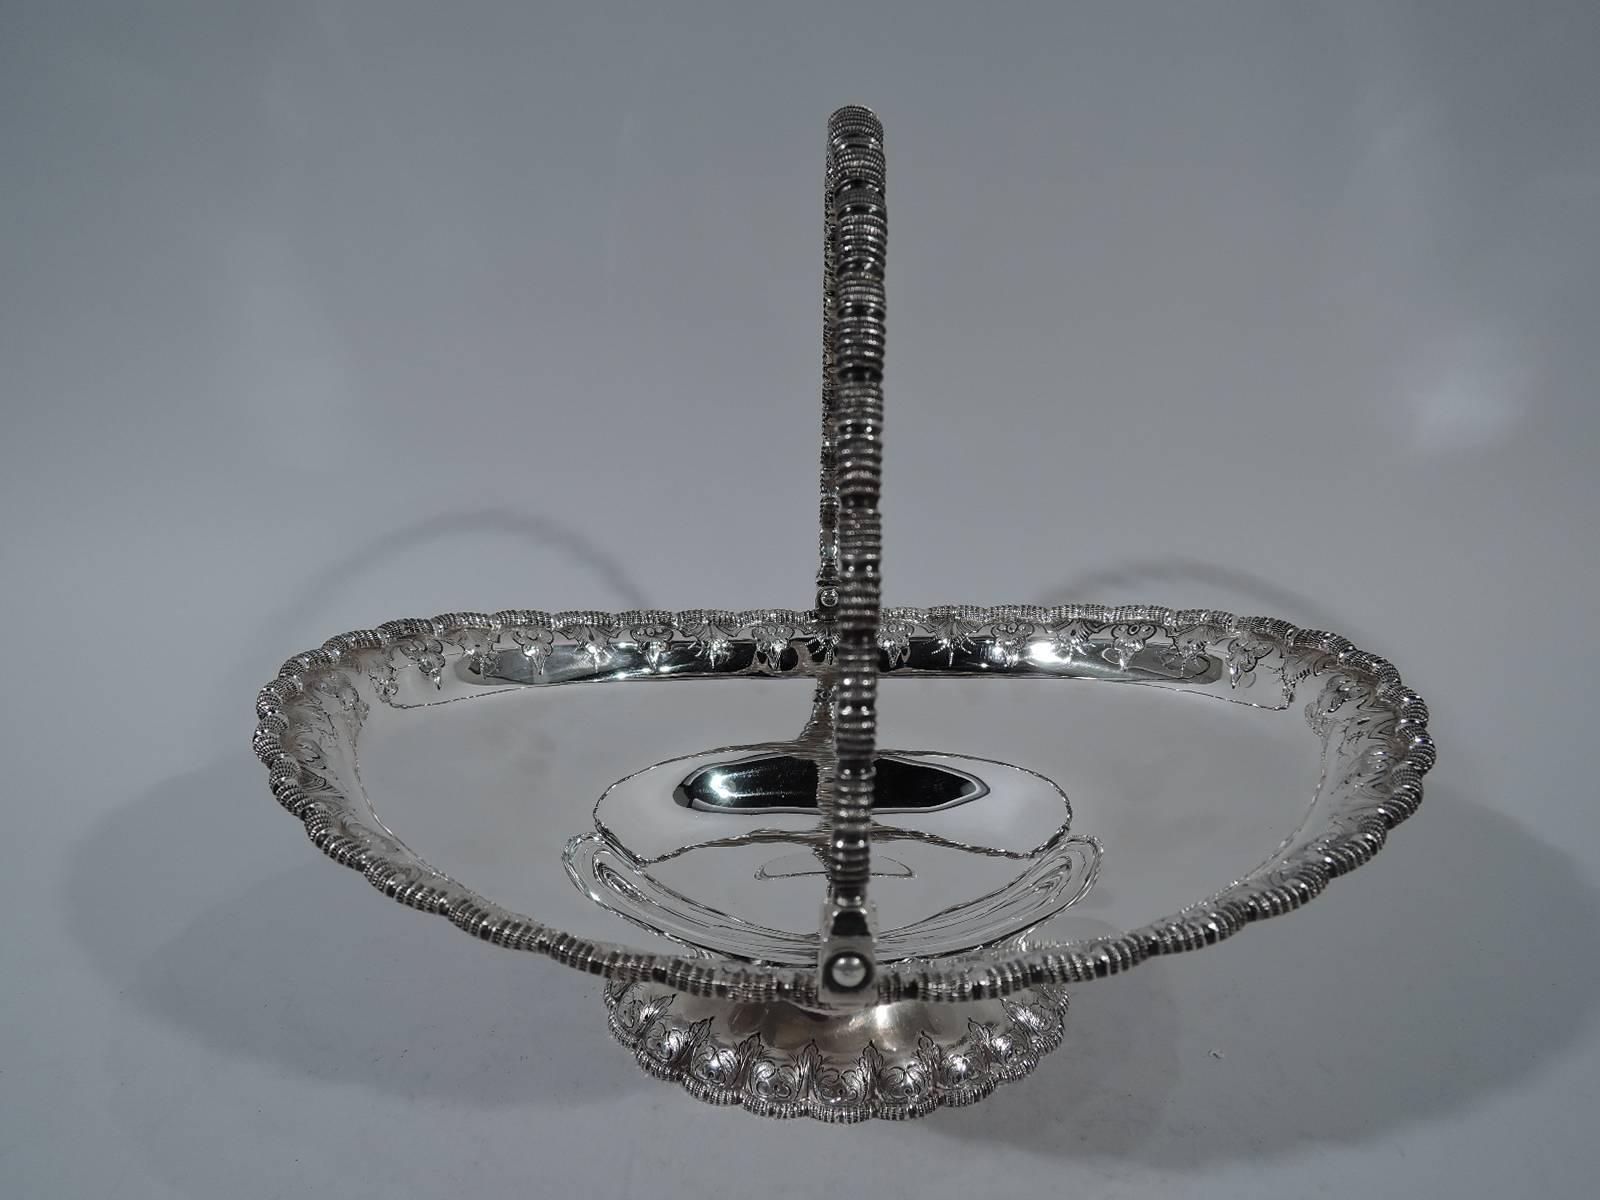 Early sterling silver basket. Retailed by Tiffany & Co. at 550 Broadway, New York. Oval shallow bowl and scalloped gadrooned rim with chased and engraved fleurs de lys. Foot raised and lobed with scalloped gadrooned rim and engraved leaves. Swing